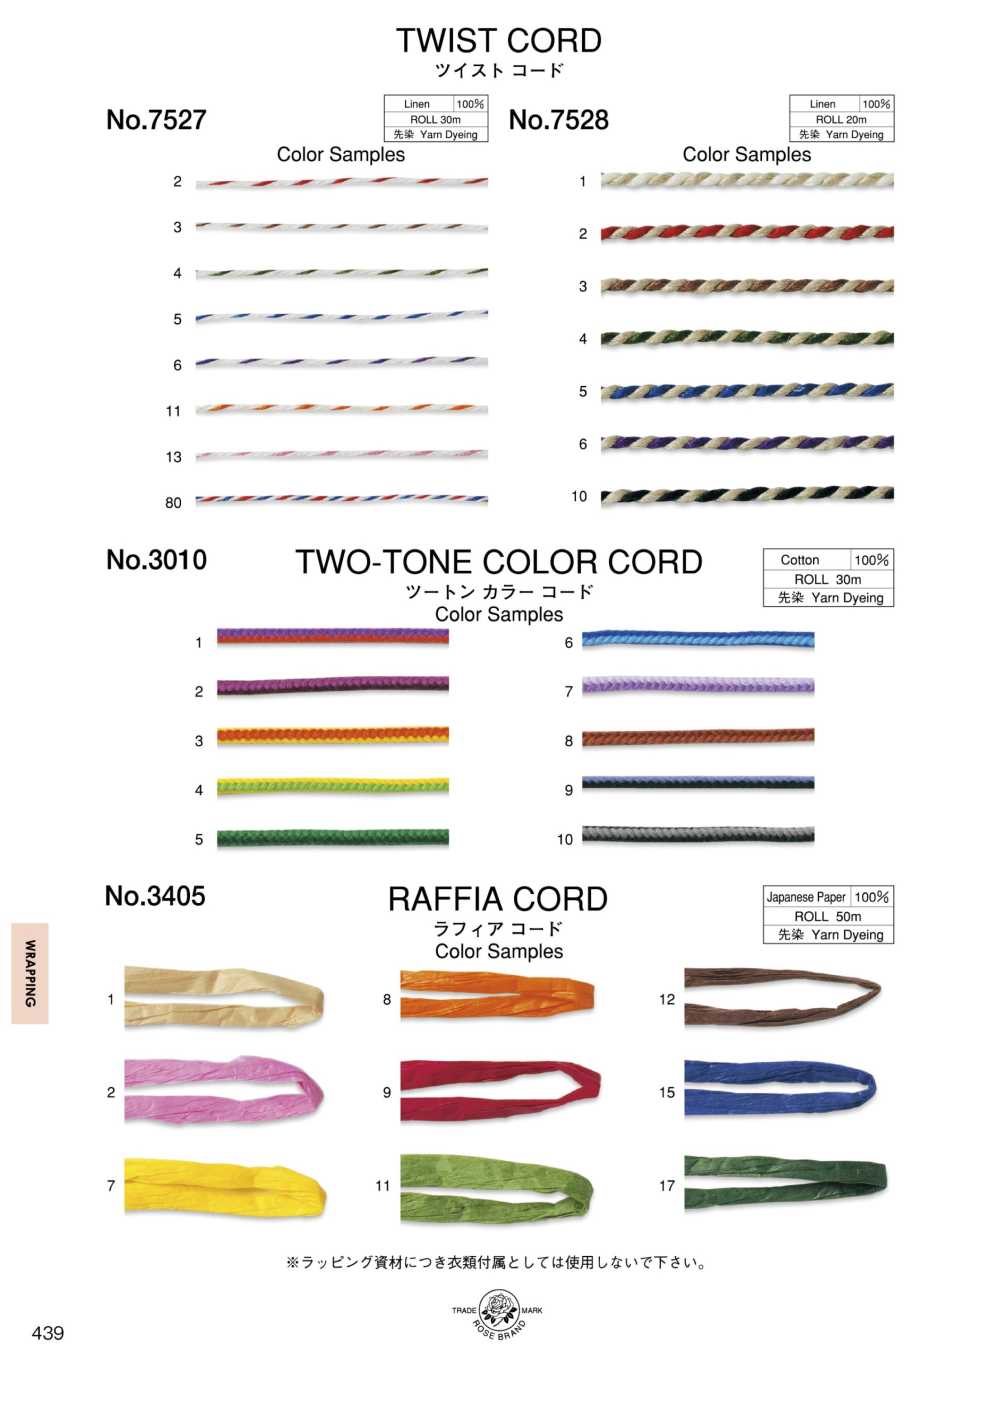 7528 Twisted Cord[Ribbon Tape Cord] ROSE BRAND (Marushin)